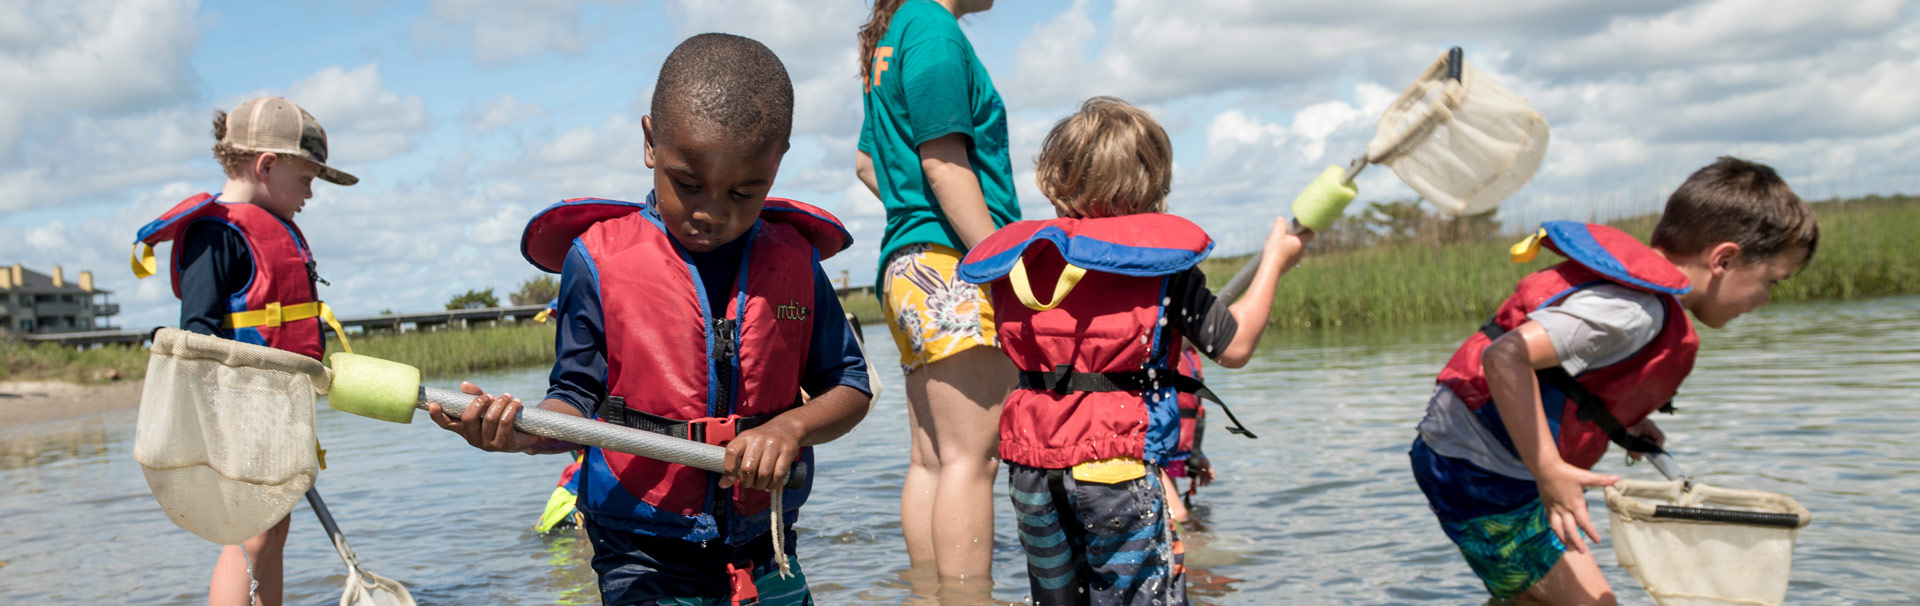 Children with nets walk through a marsh looking for marine specimens to collect